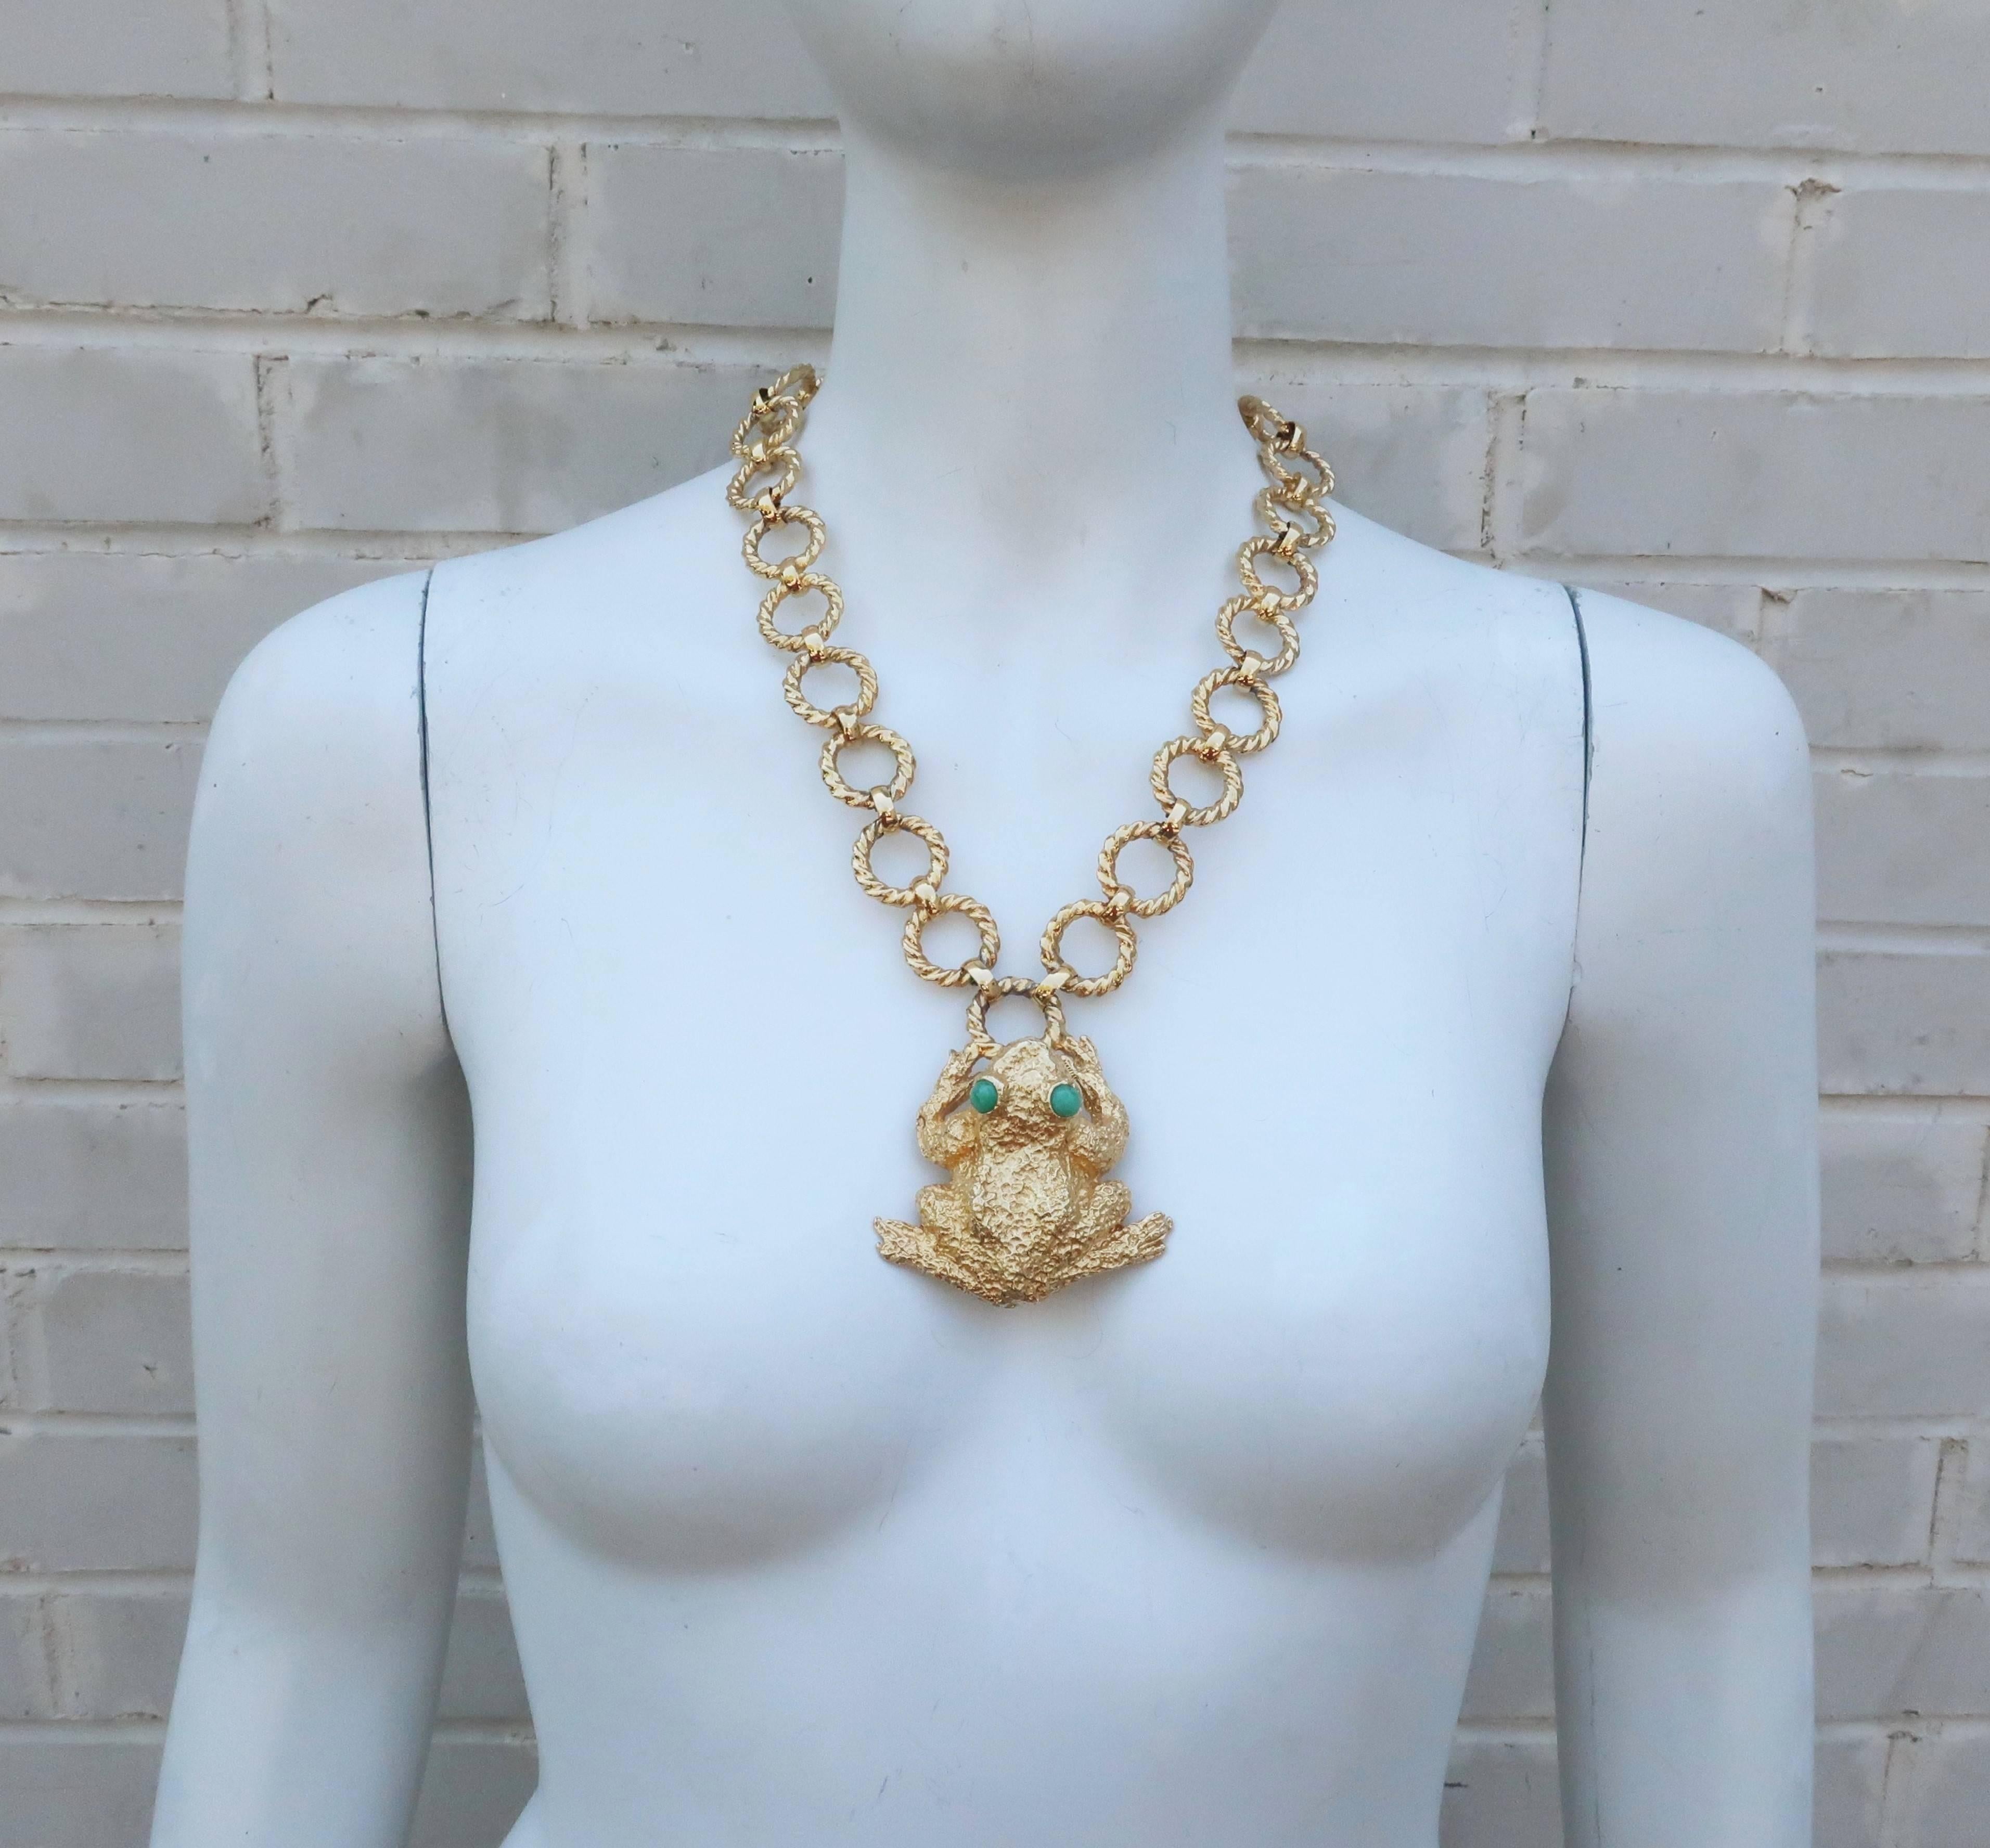 Women's 1971 Mimi di N Gold Tone Frog Statement Necklace